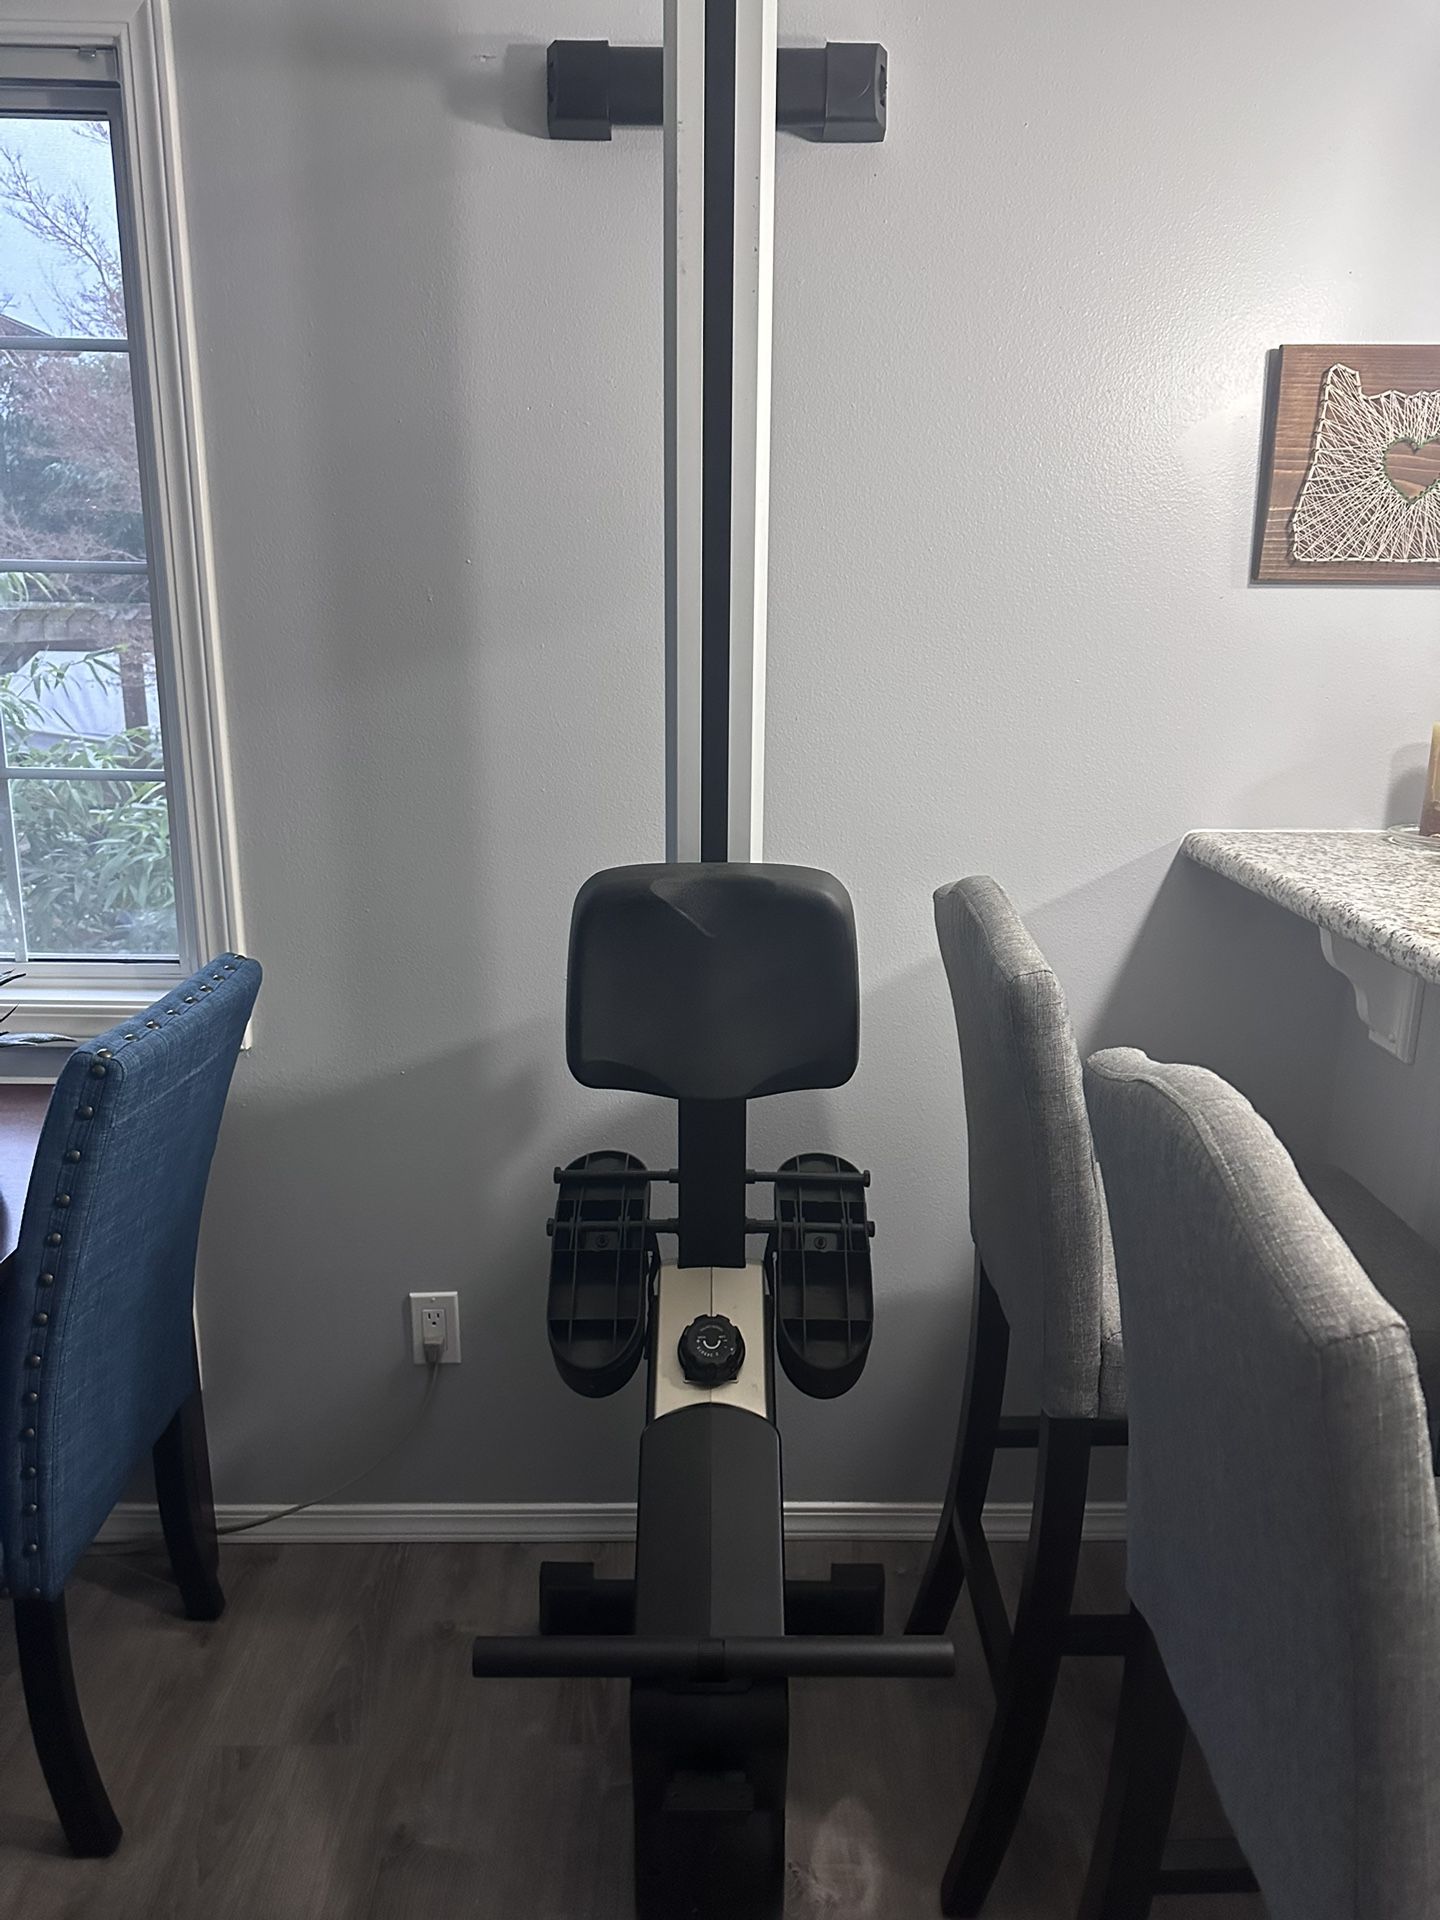 Rowing Machine barely Used 